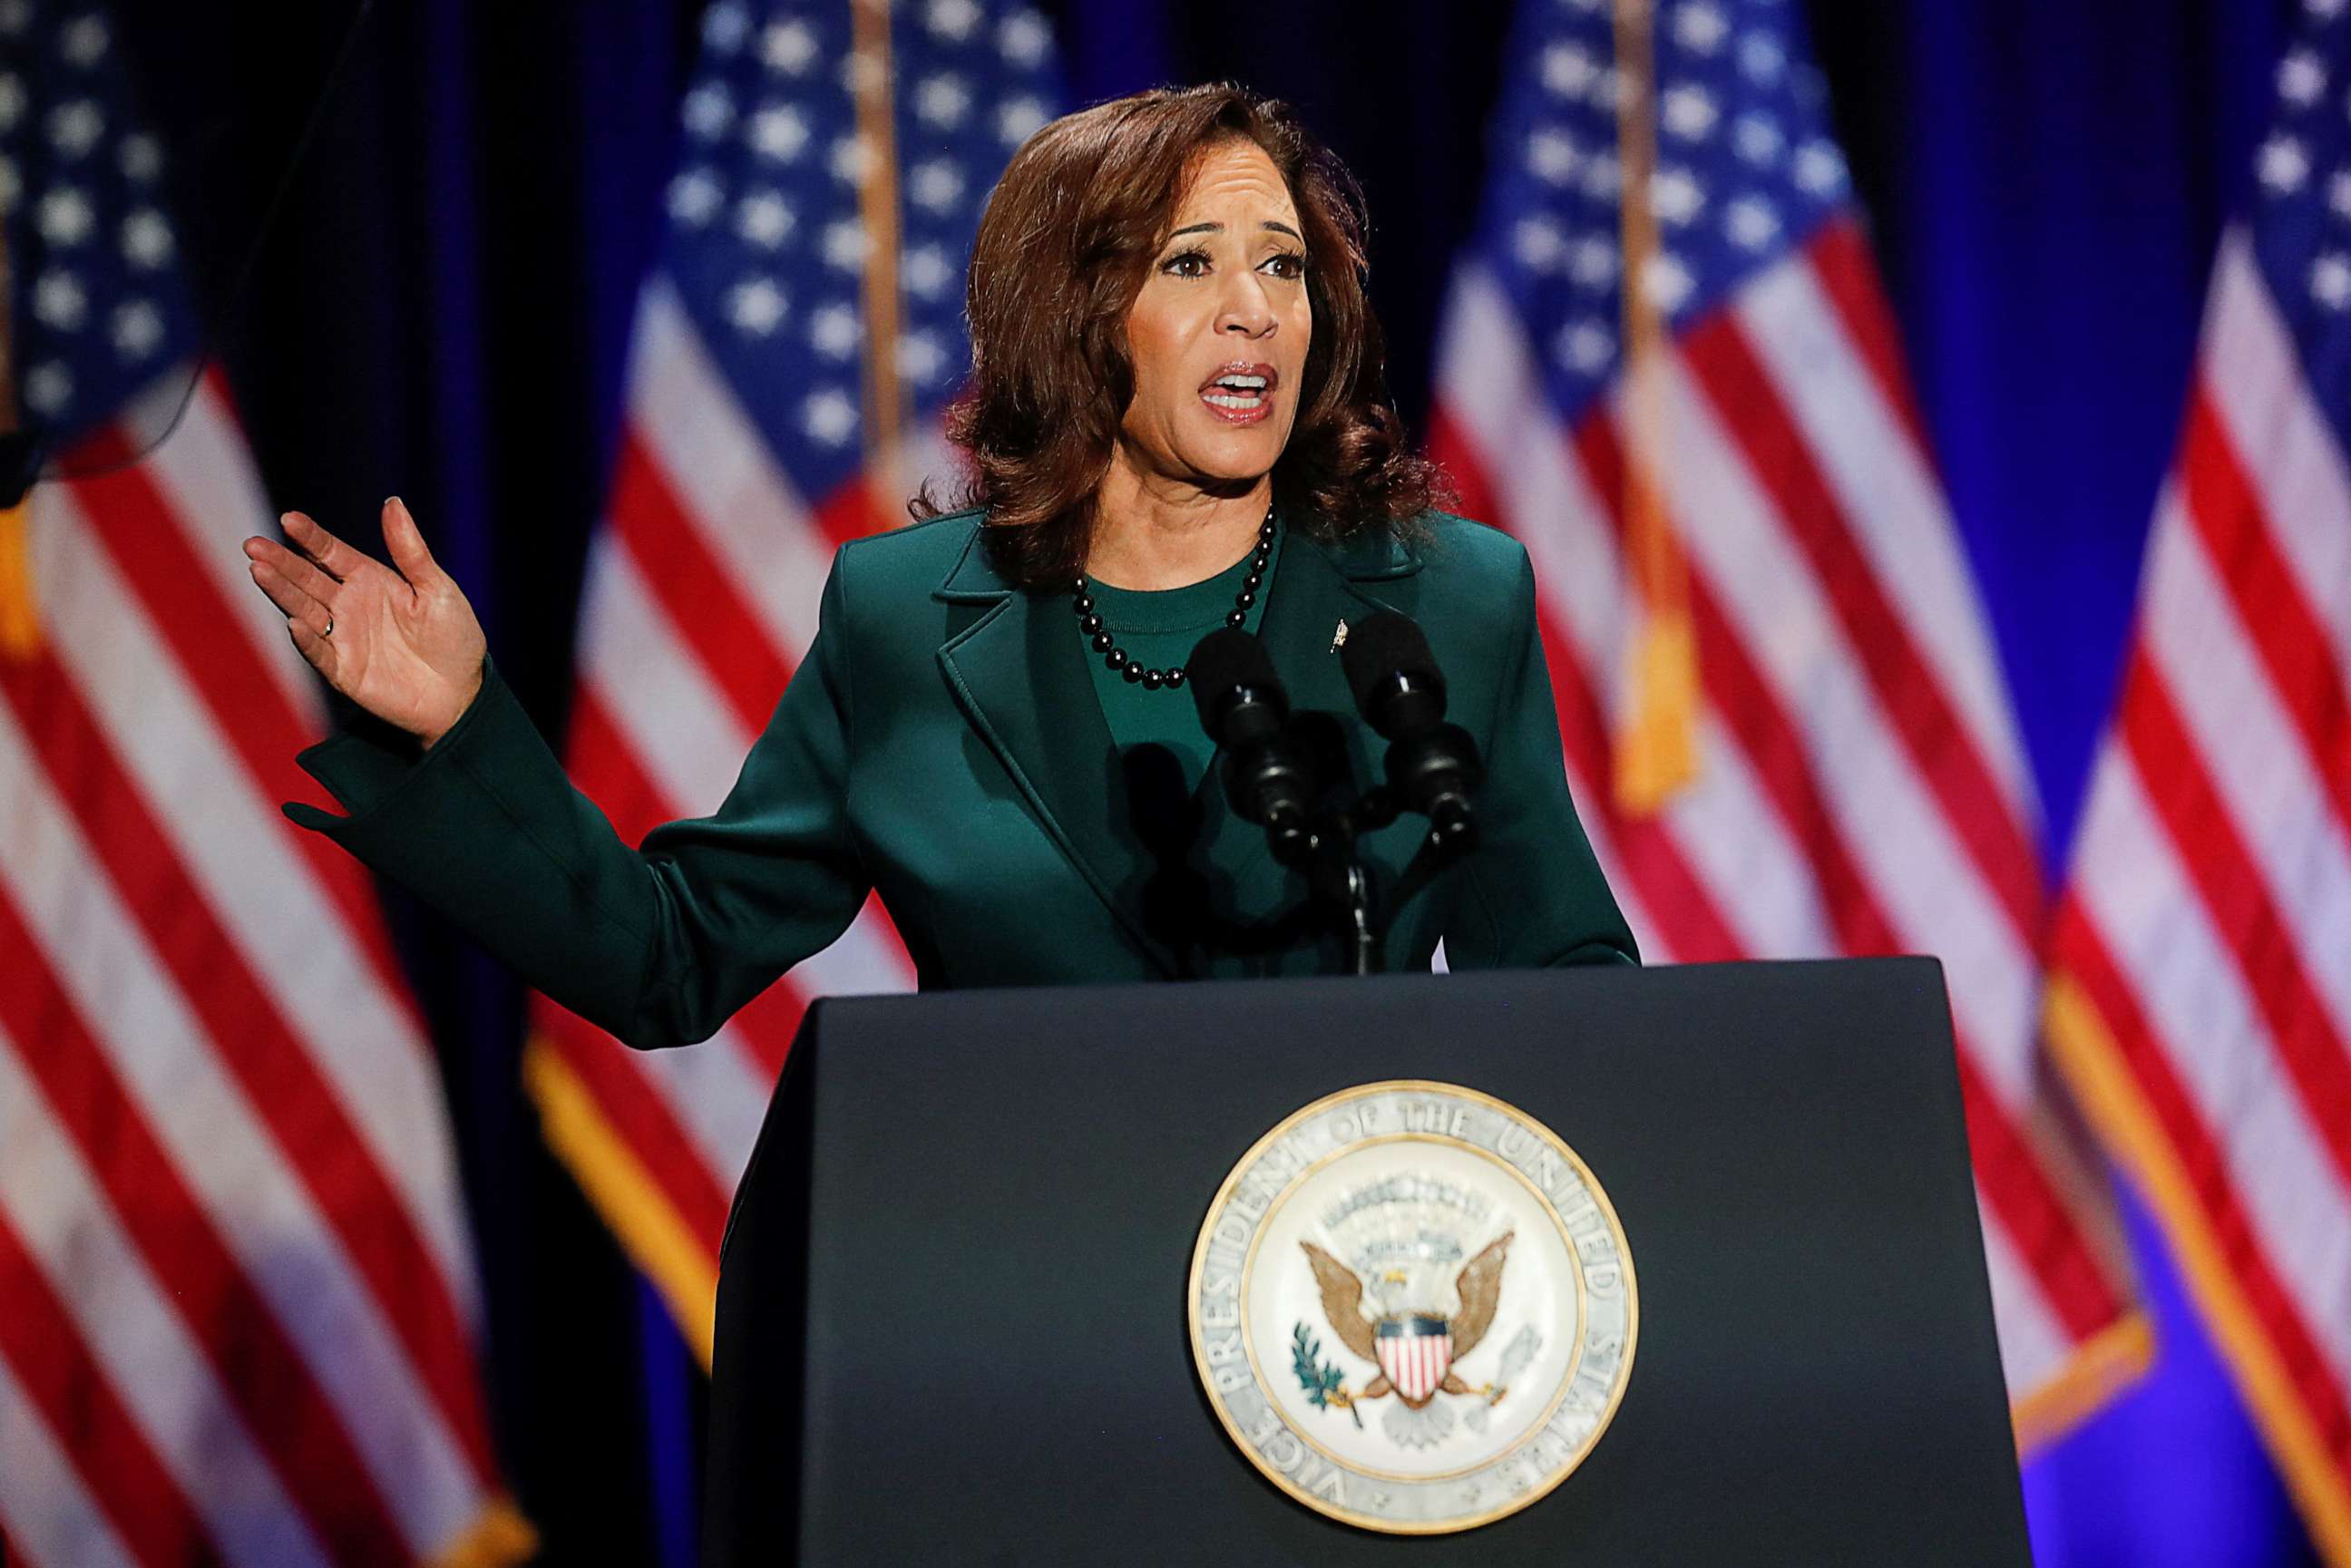 PHOTO: Vice President Kamala Harris gives a speech about abortion rights, to mark the 50th anniversary of the landmark Supreme Court decision in the Roe vs Wade case, in Tallahassee, Fl., Jan. 22, 2023.